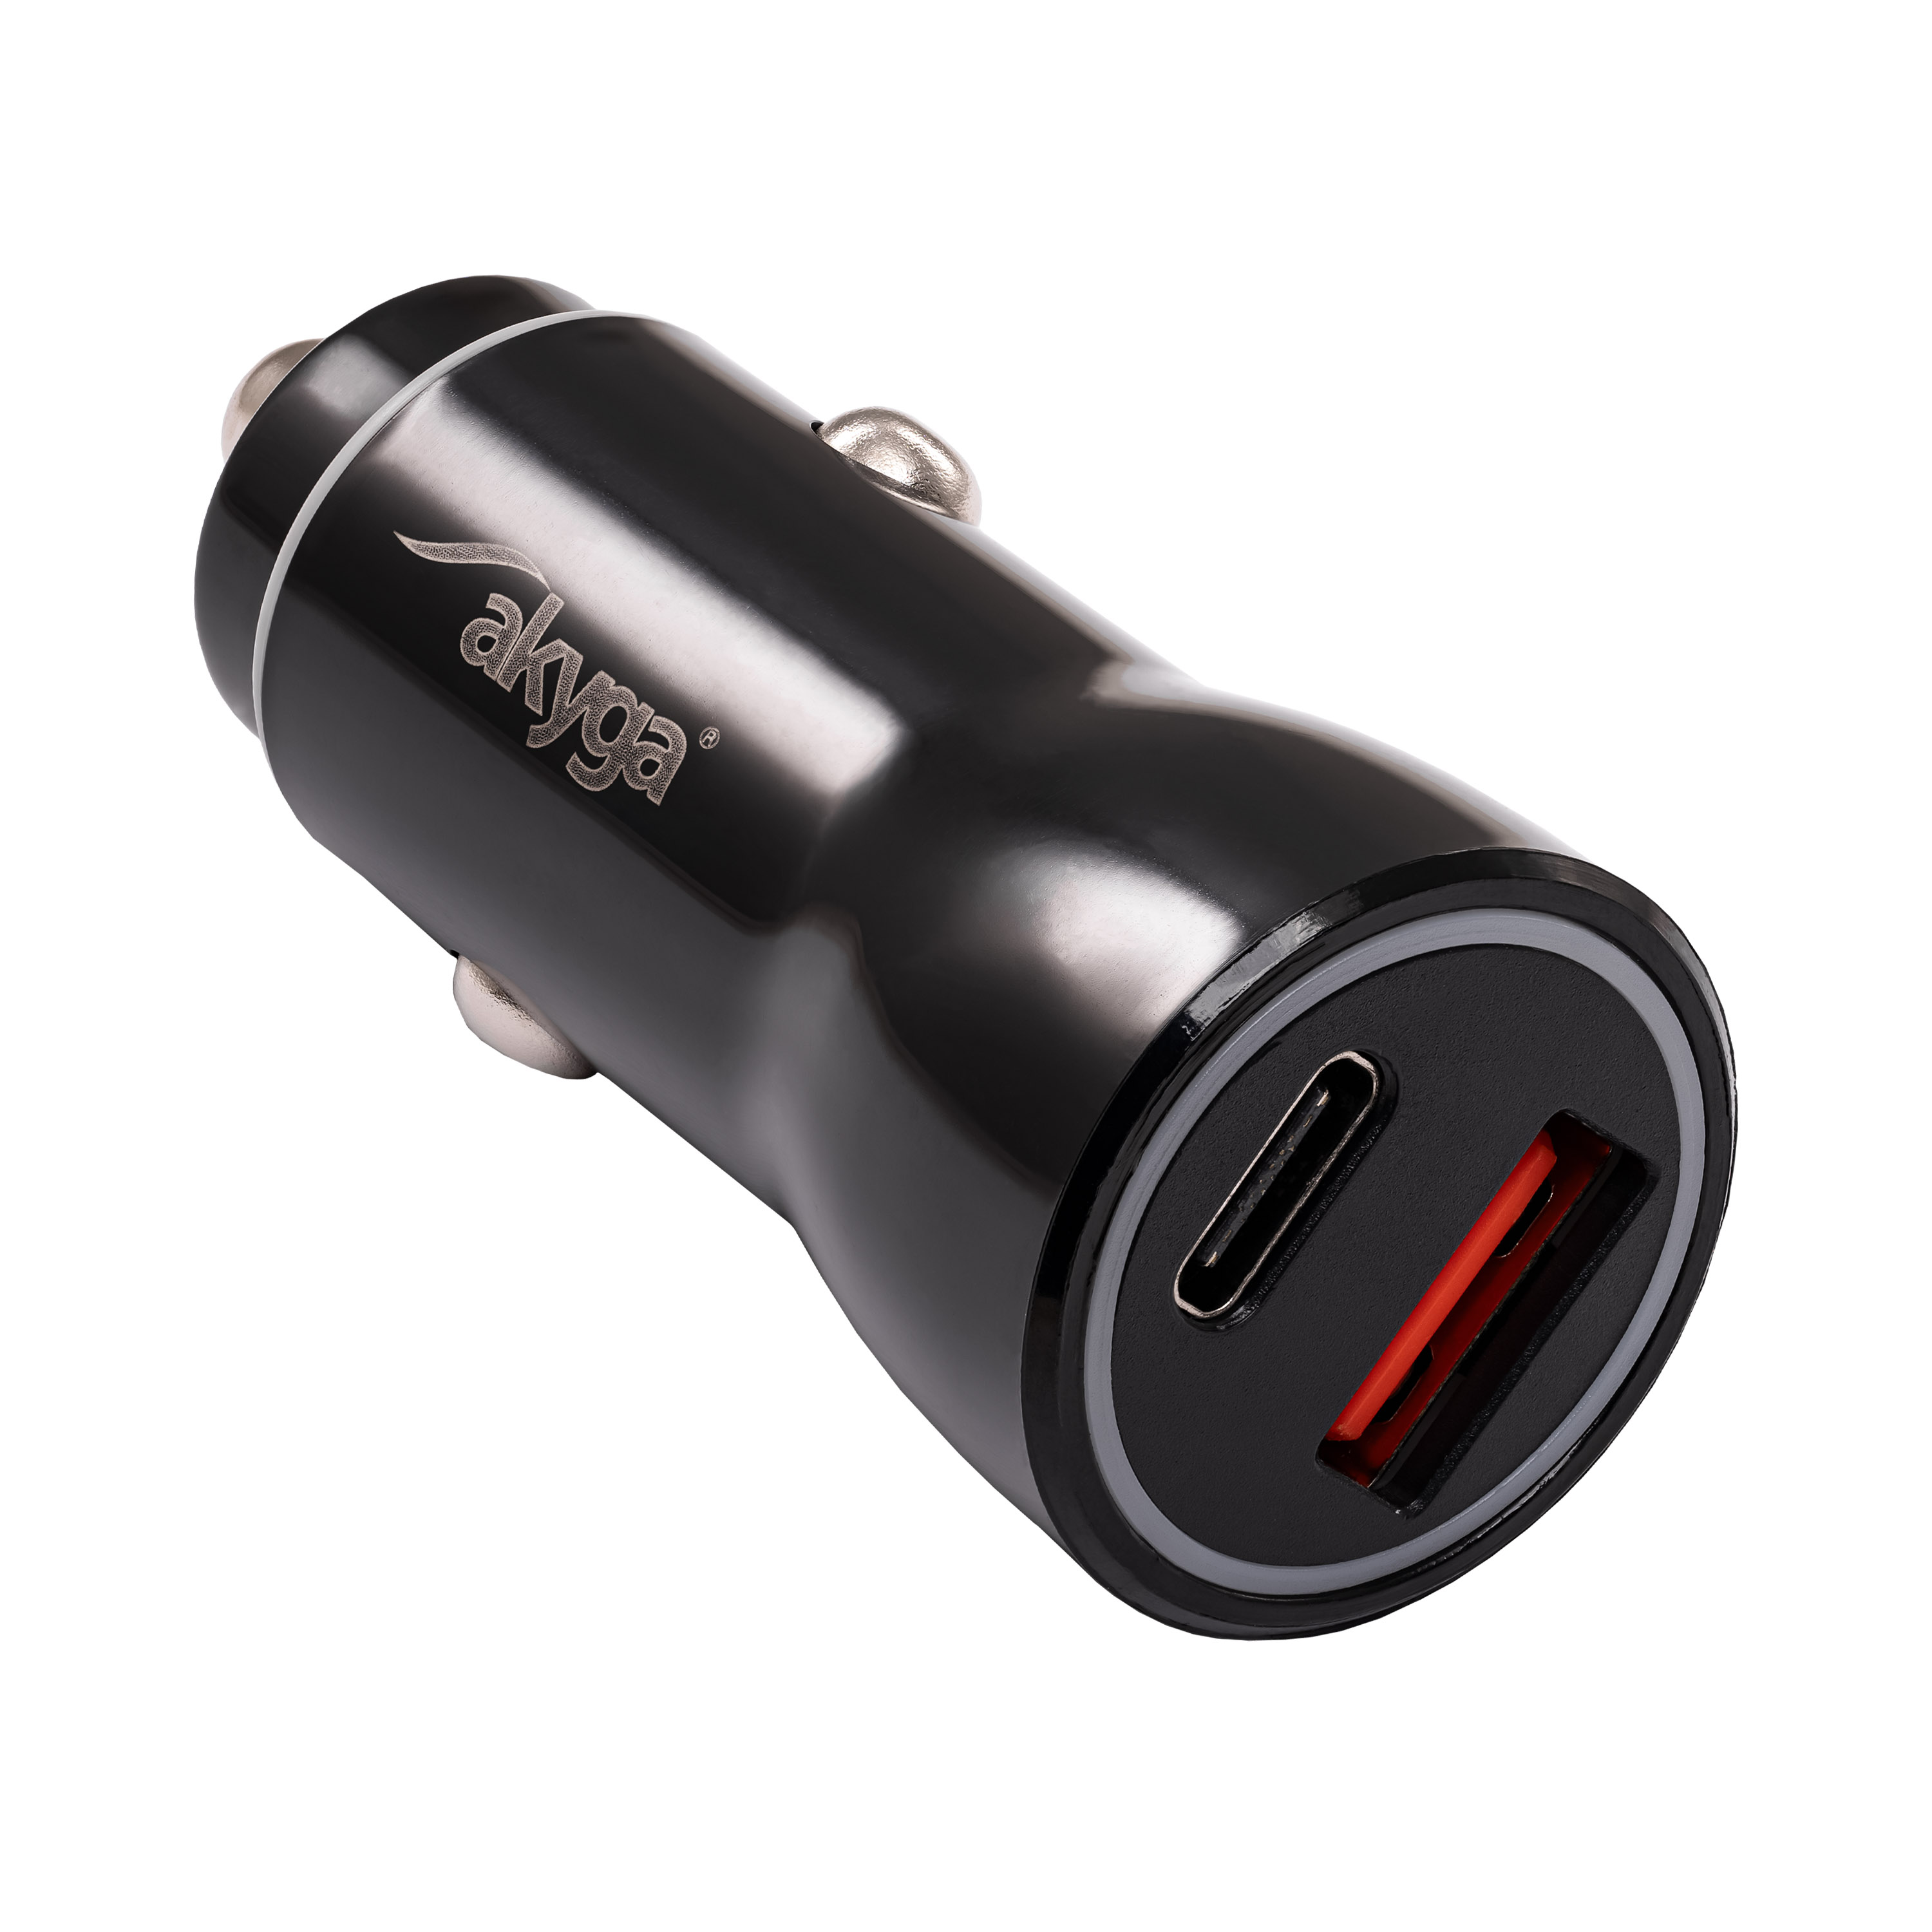 https://www.akyga.com/app_products_attachments/promotions/symbol/AK-CH-16/name/USB_Car_Charger_AK-CH-16_USB-A_USB-C_PD_5-12V_3A_18W_Quick_Charge_01_3000x3000.jpg